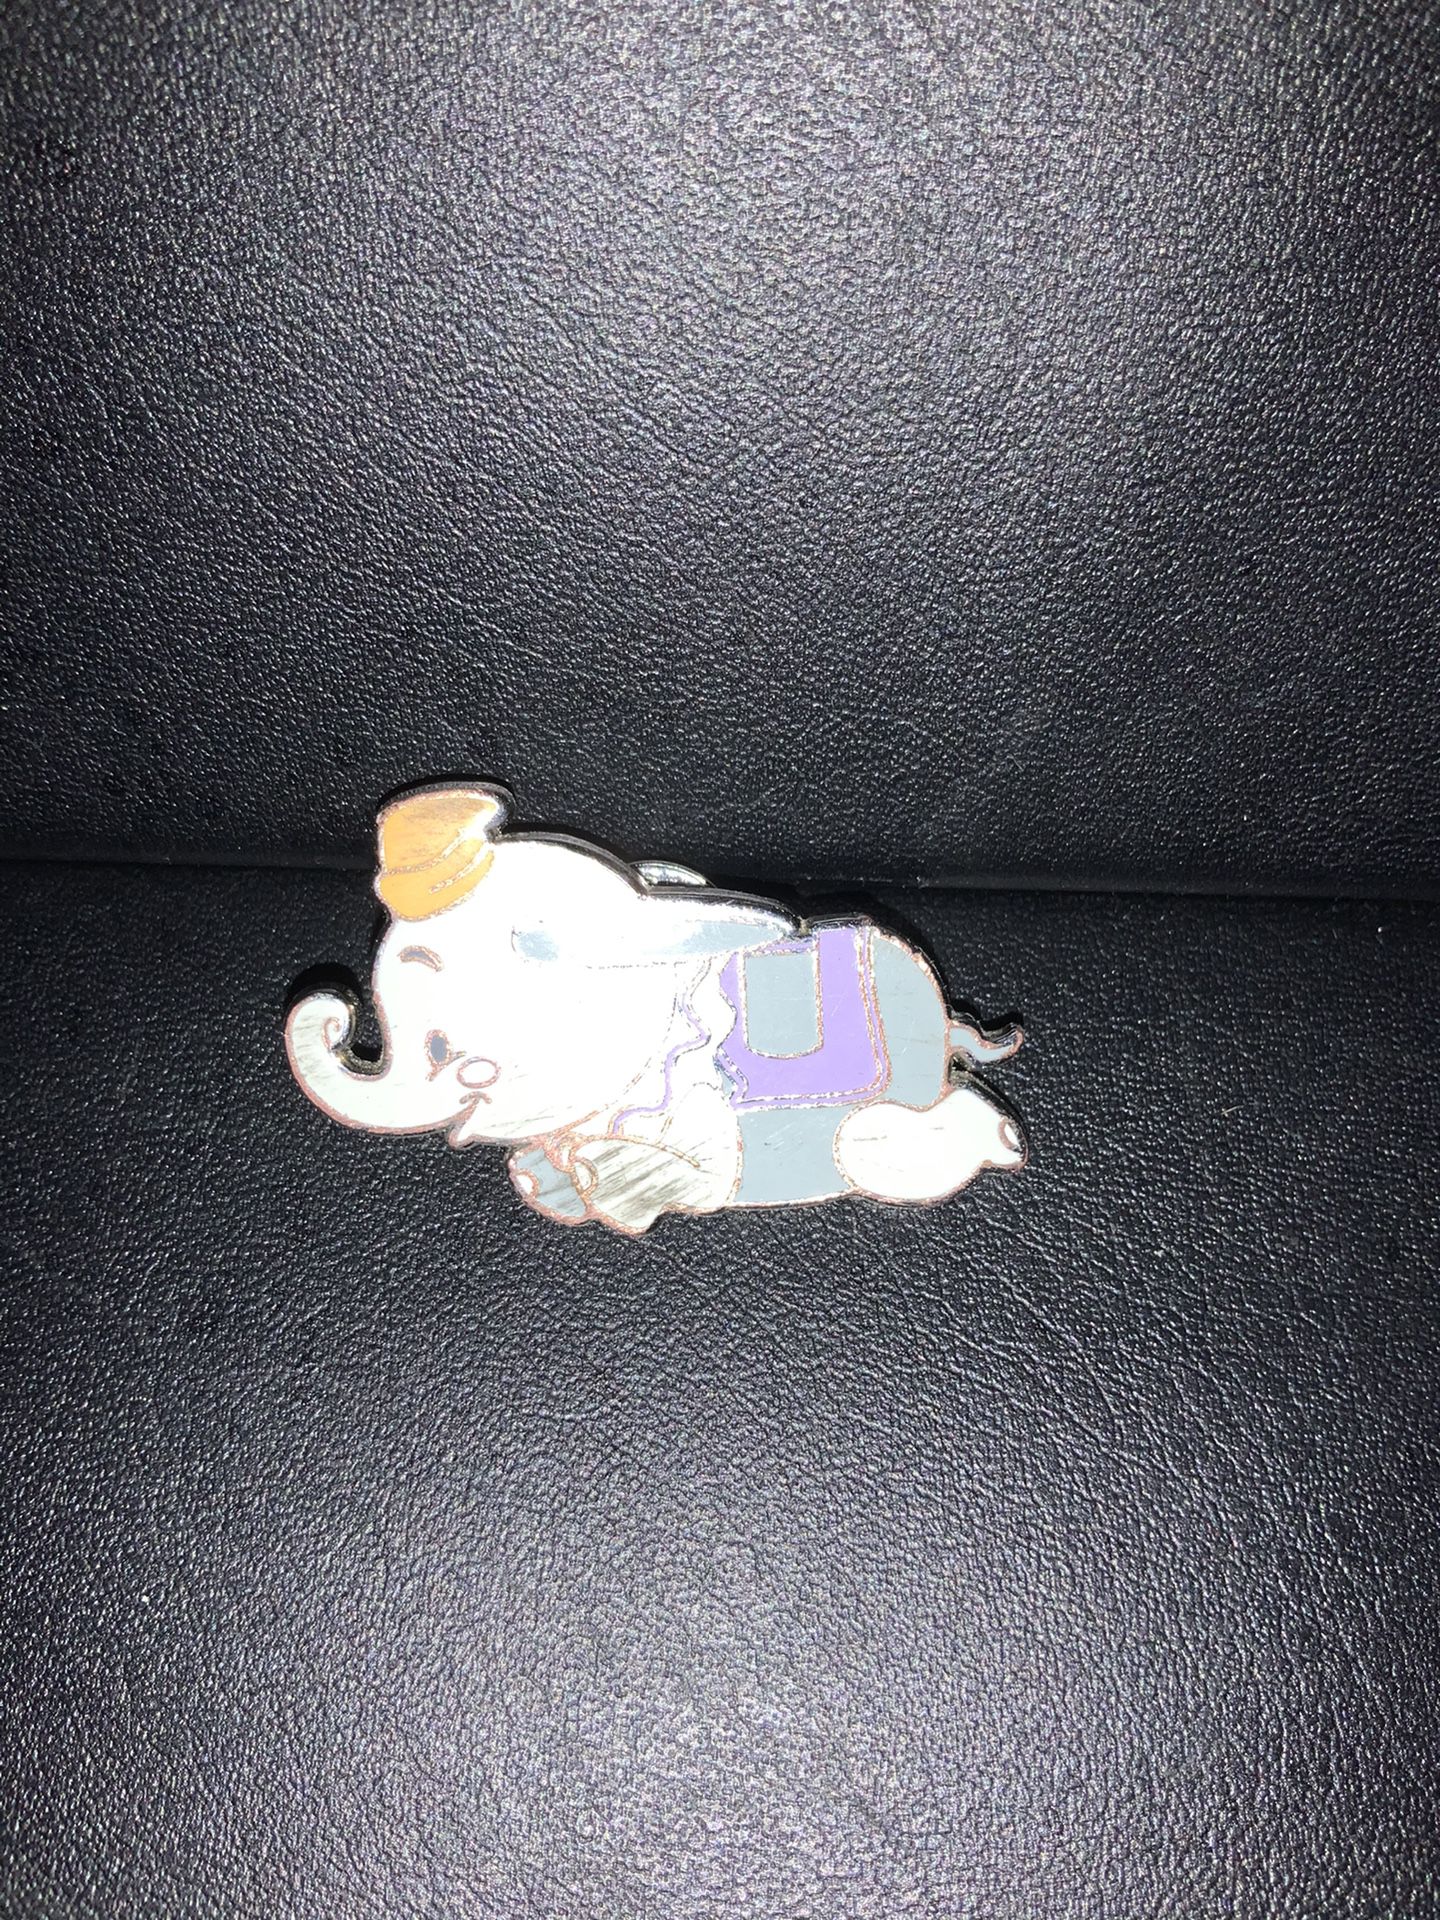 Disney pin (has some scratches on it see photos)